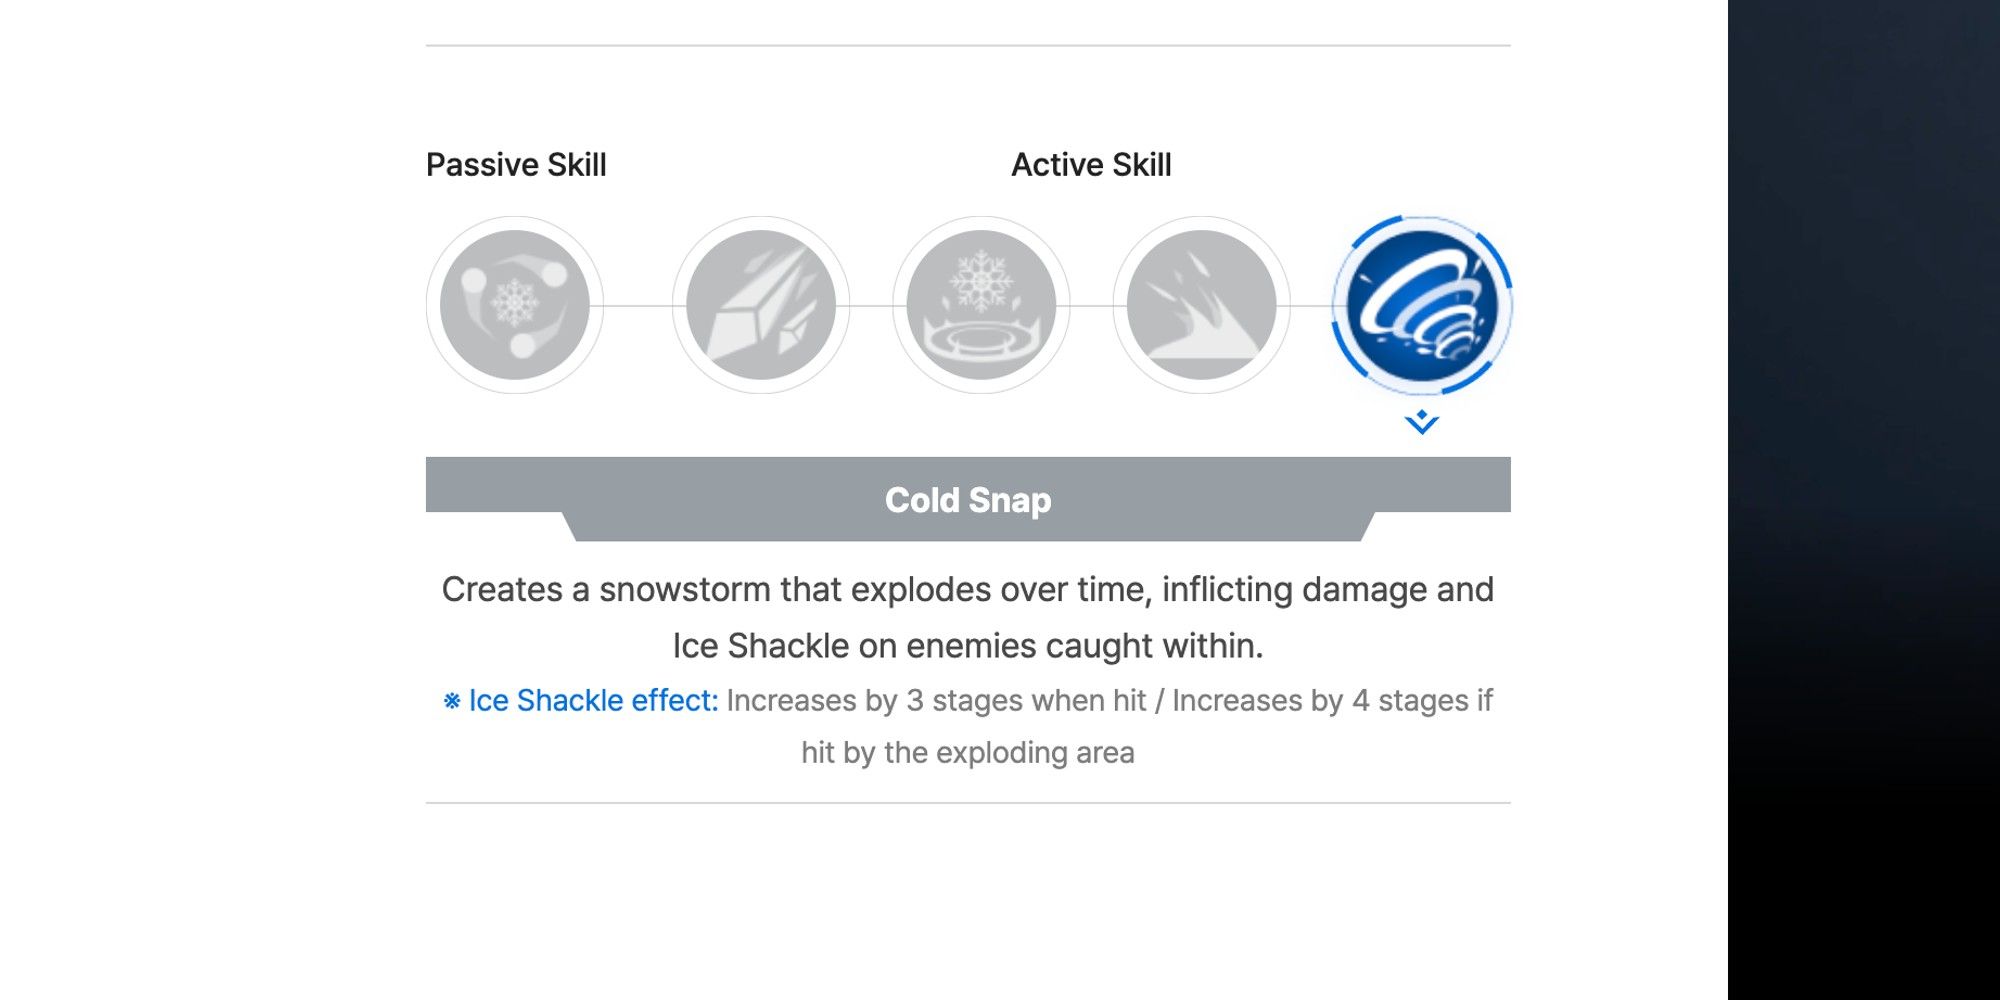 The Cold Snap Skill